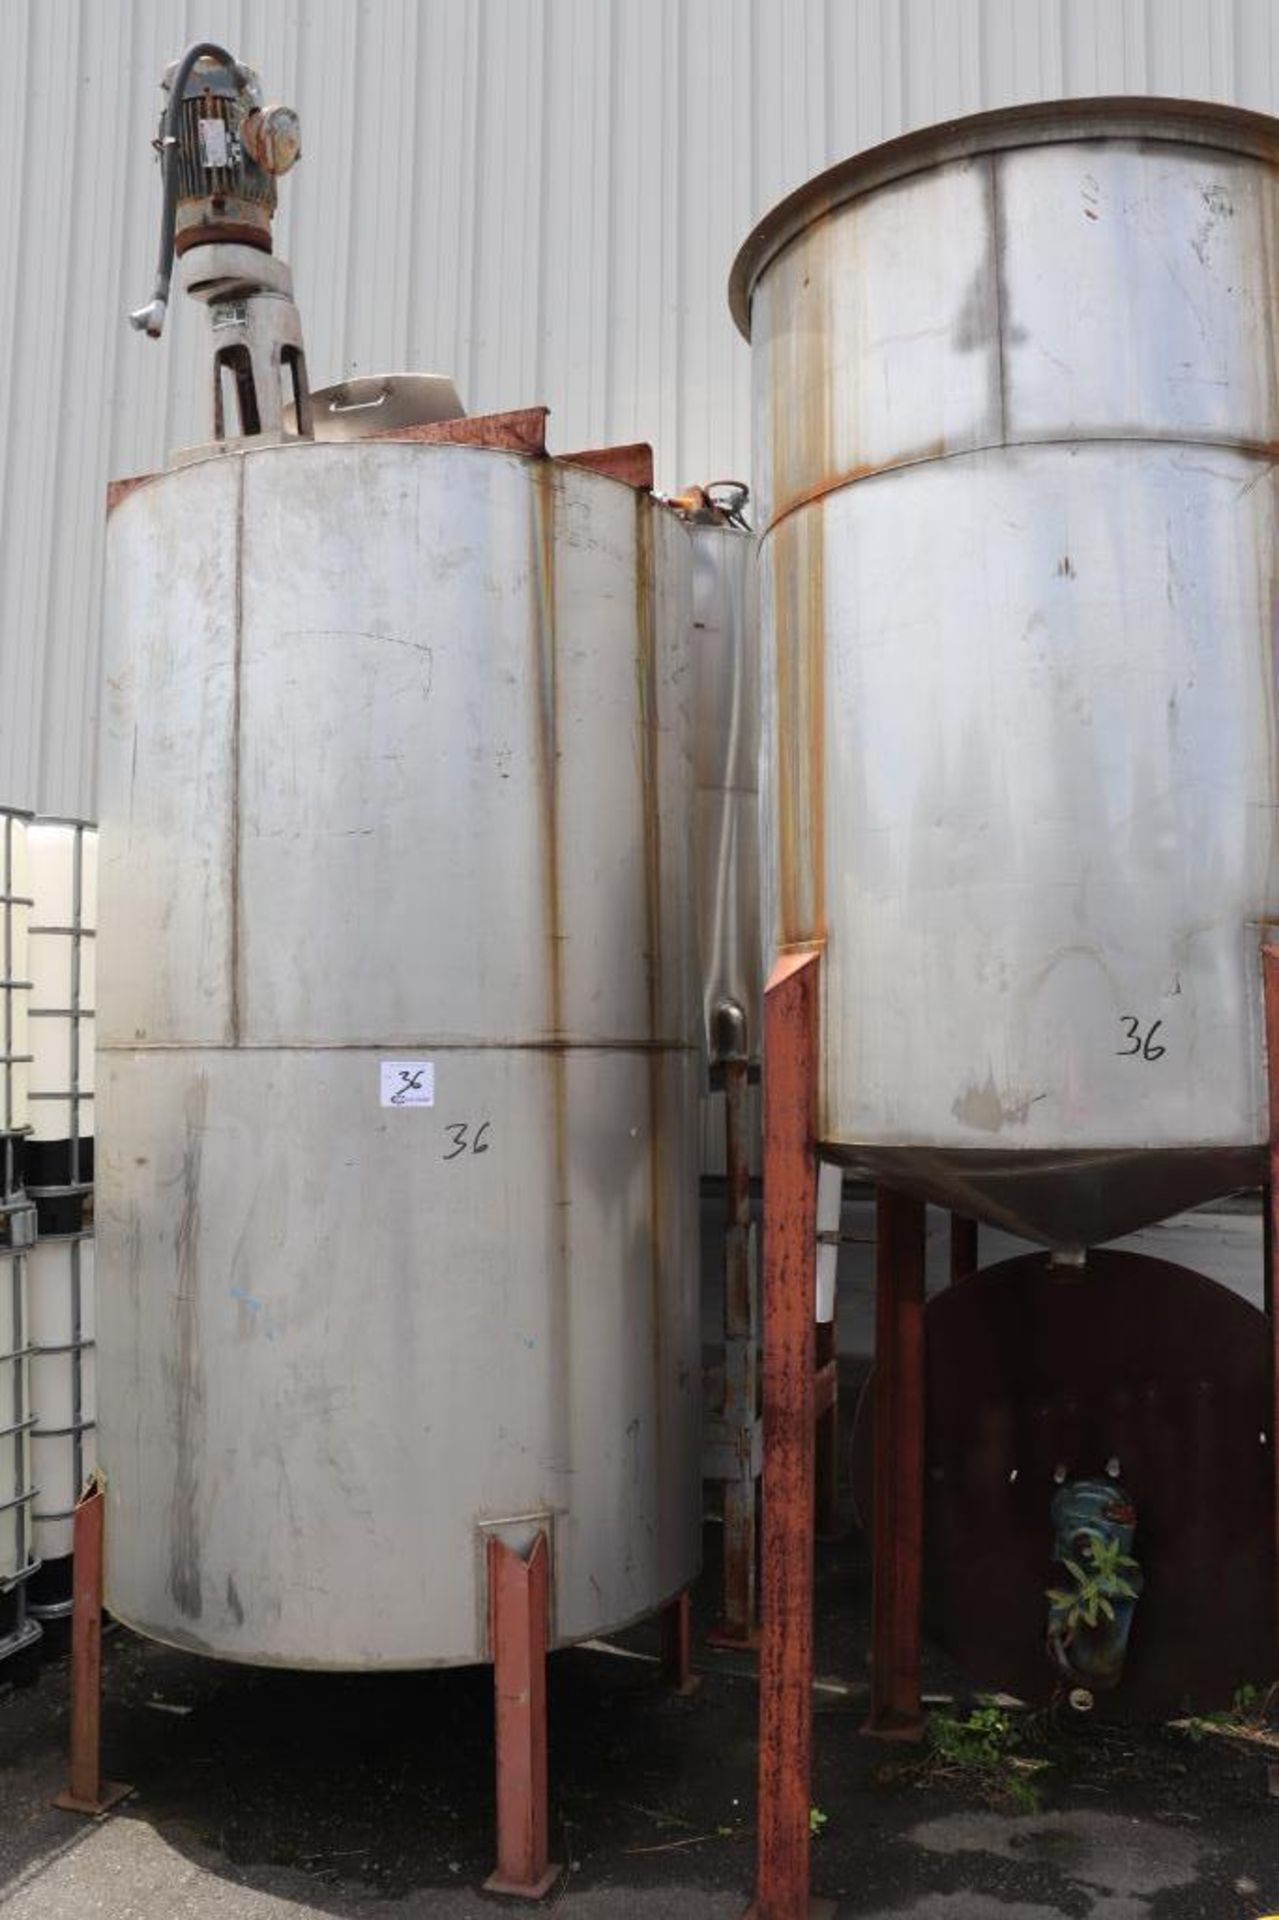 Stainless steel tanks - Image 3 of 4